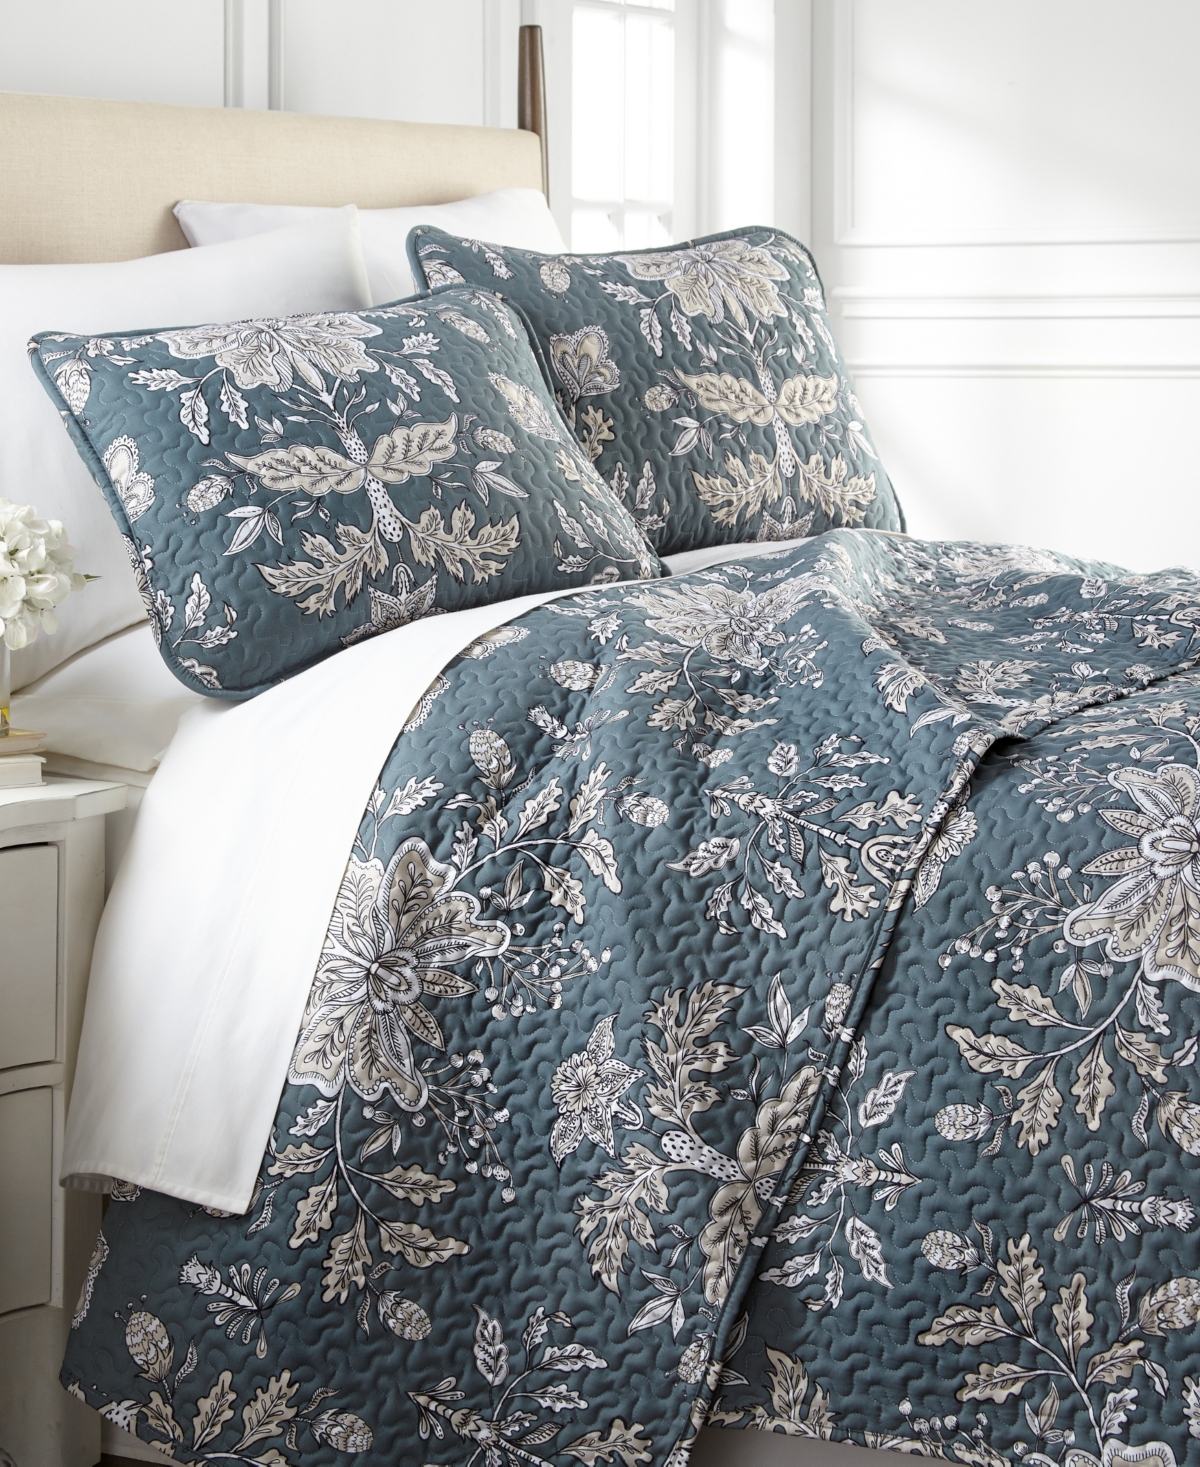 Southshore Fine Linens Vintage-look Garden Quilt And Sham 3 Piece Set, King Or California King In Blue